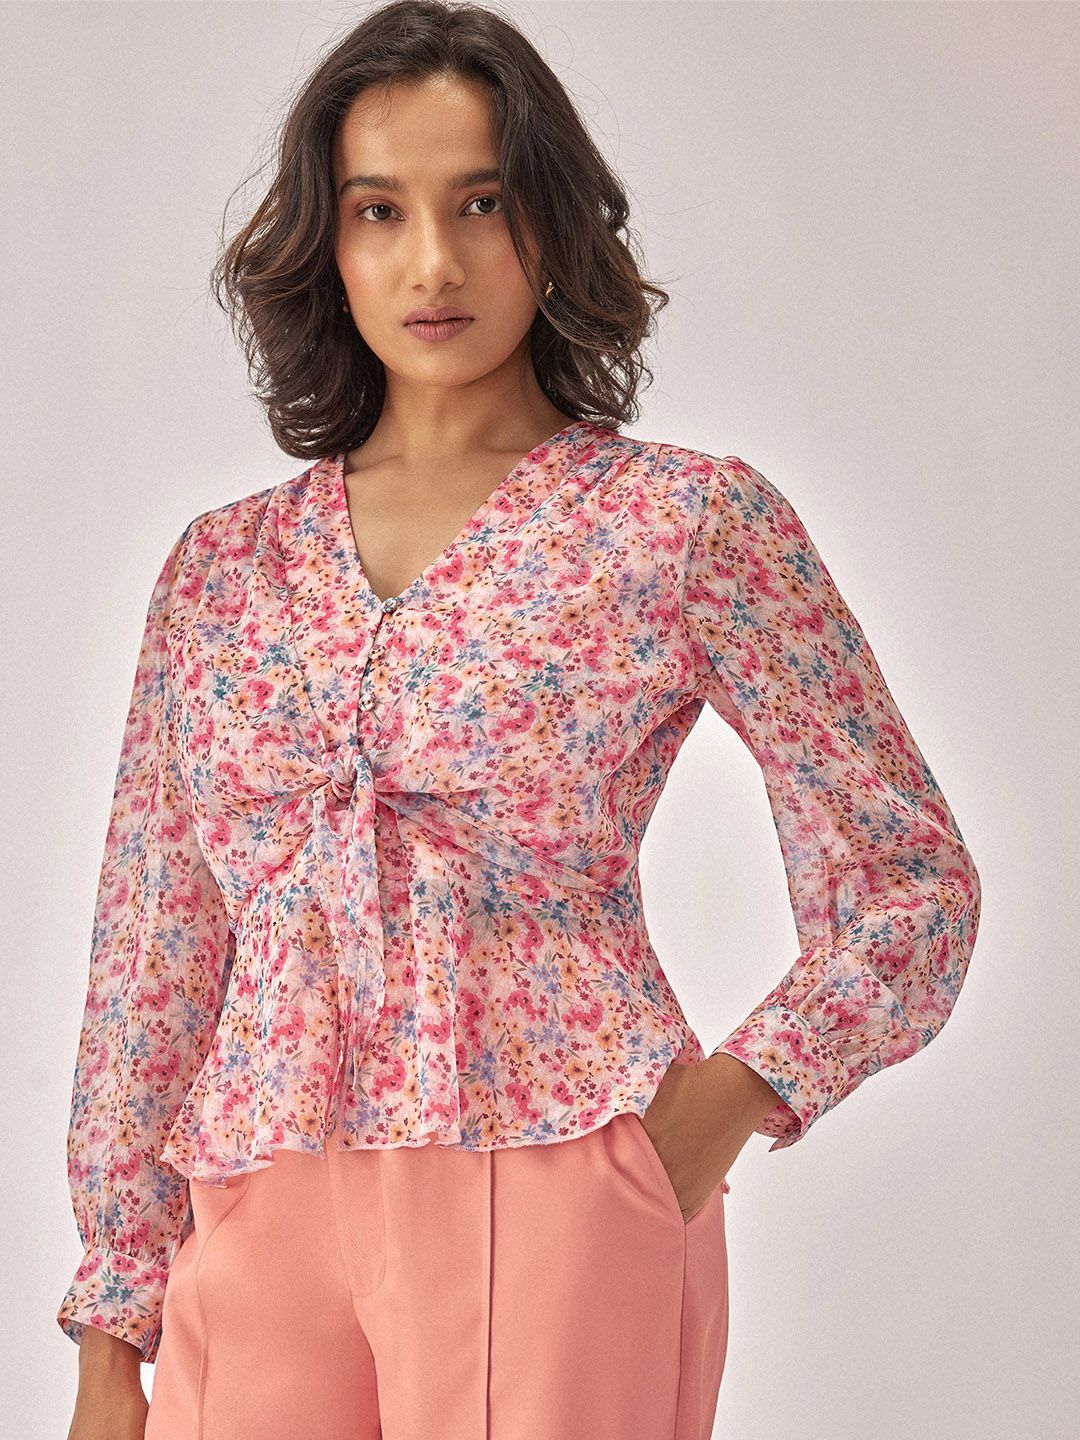 The Label Life Pink Floral Print Chiffon Cinched Waist Top Price in India